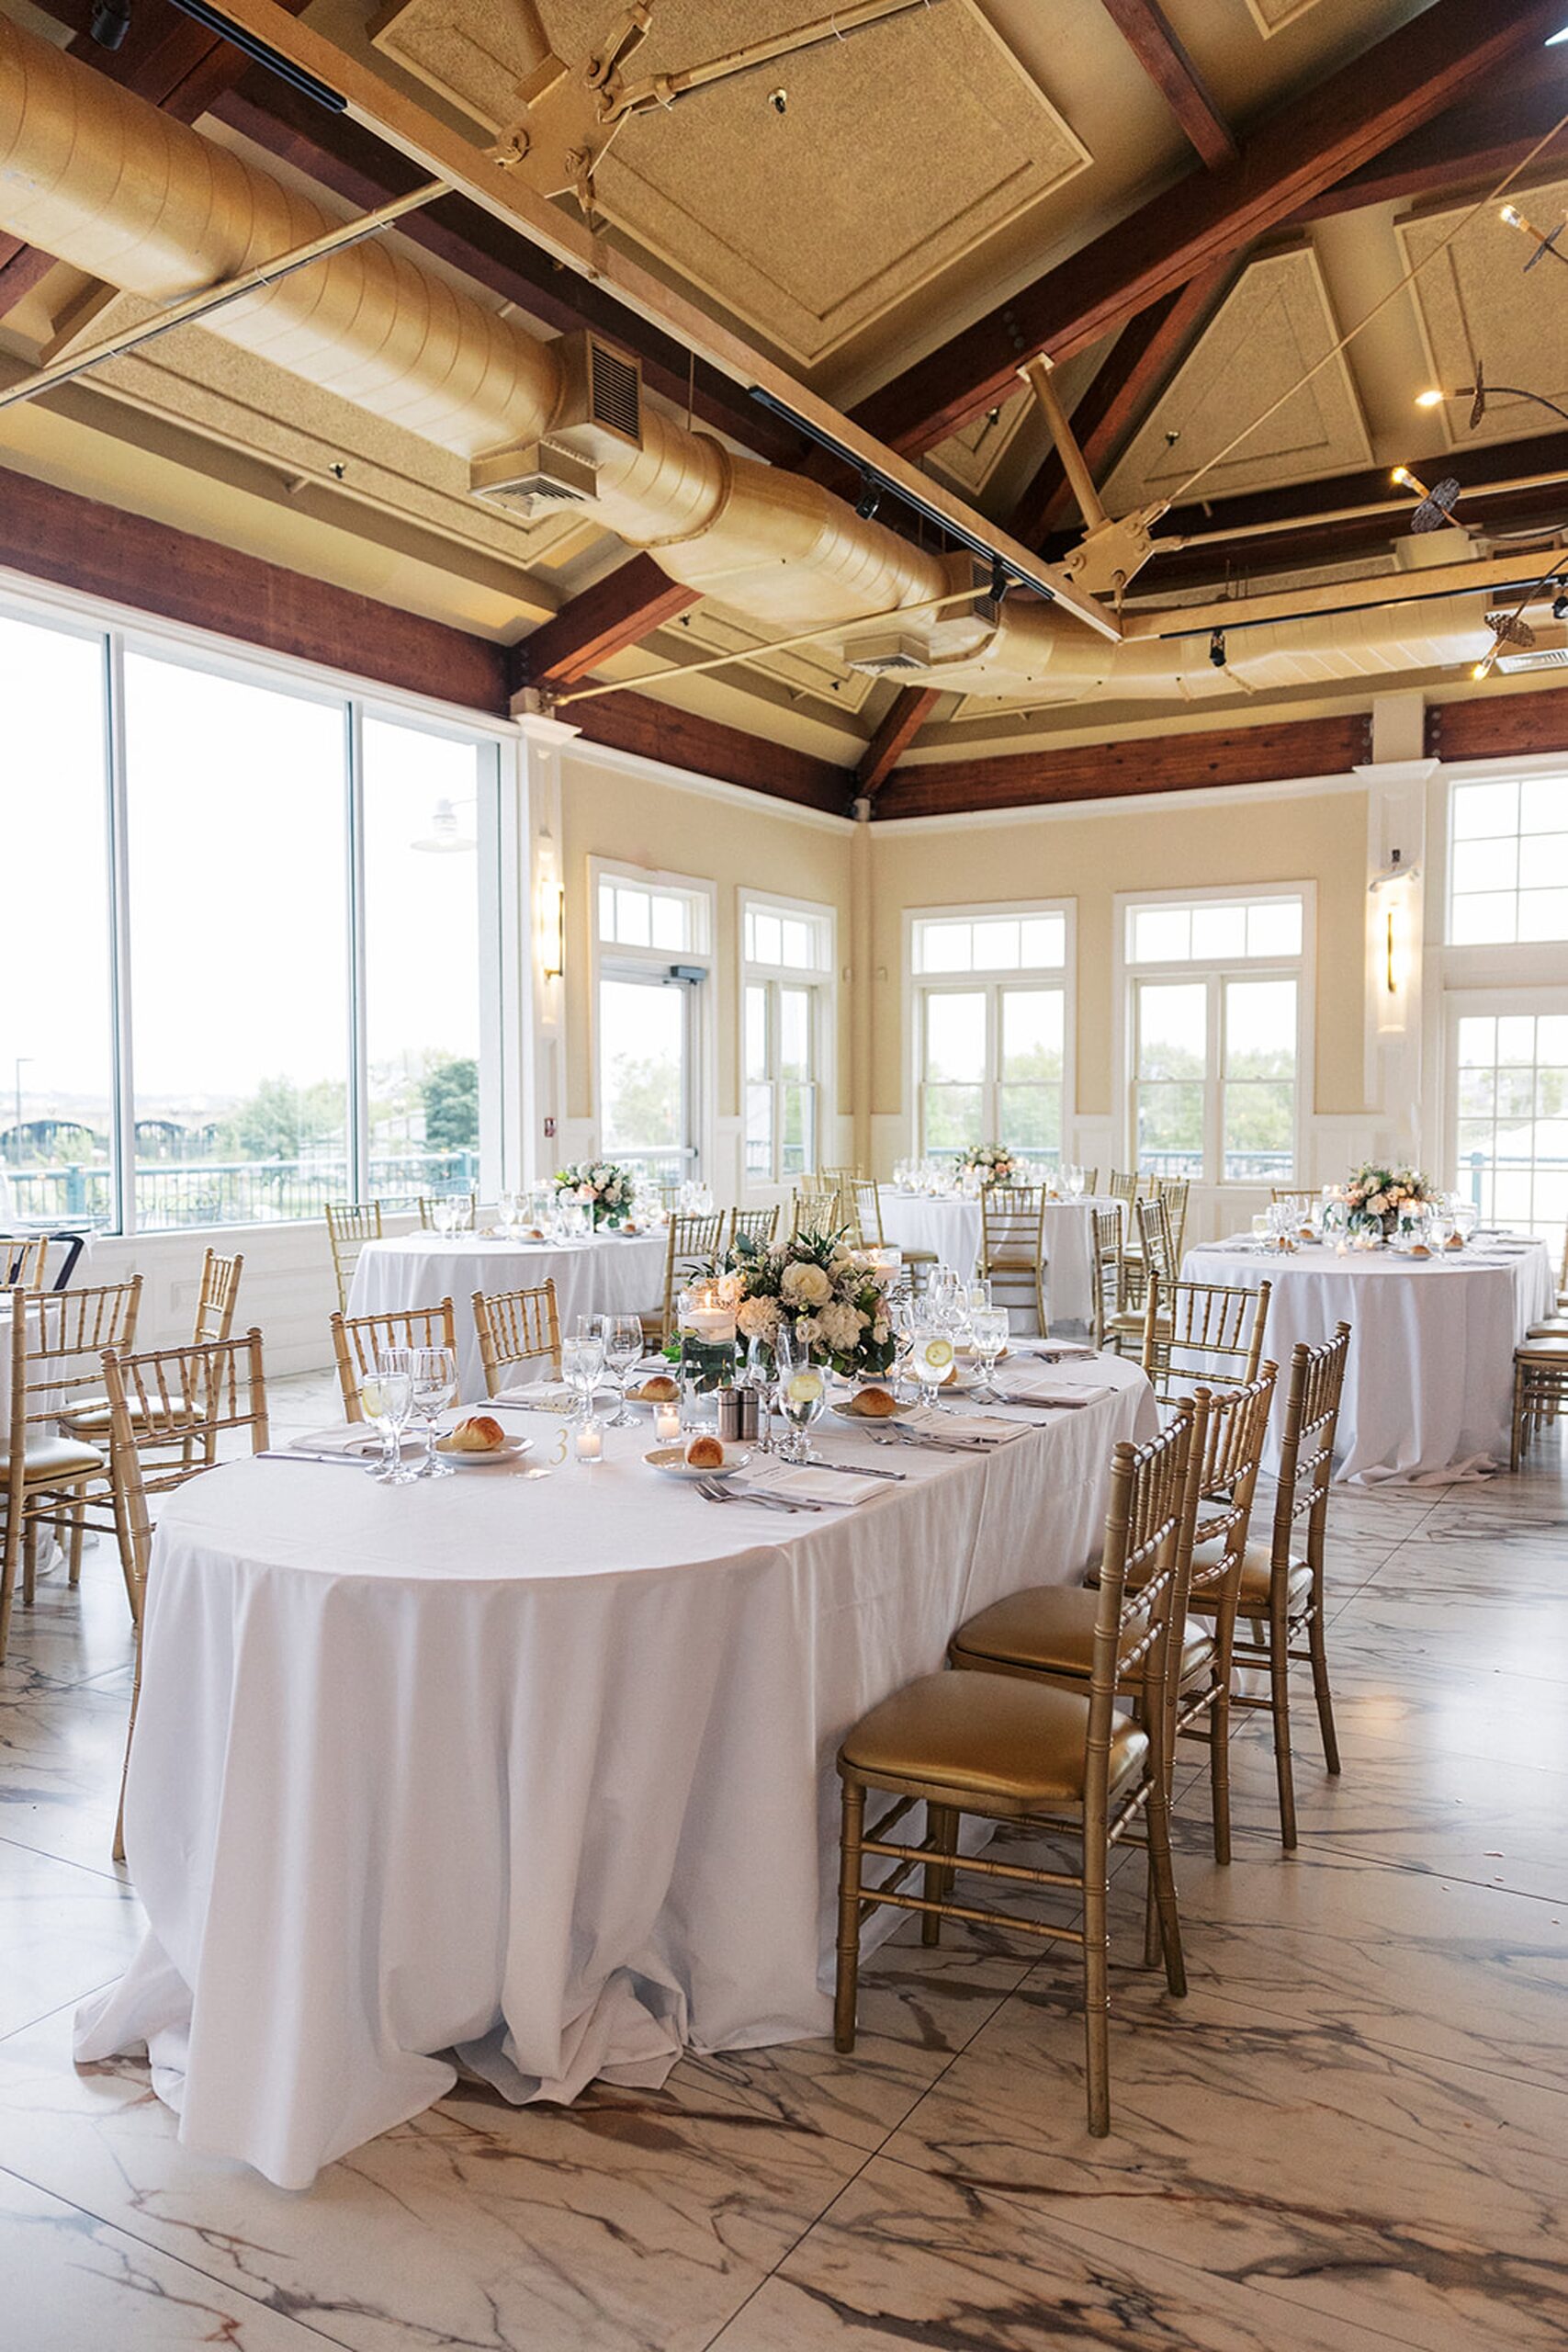 Details of a wedding reception setup up with white linens and gold chairs